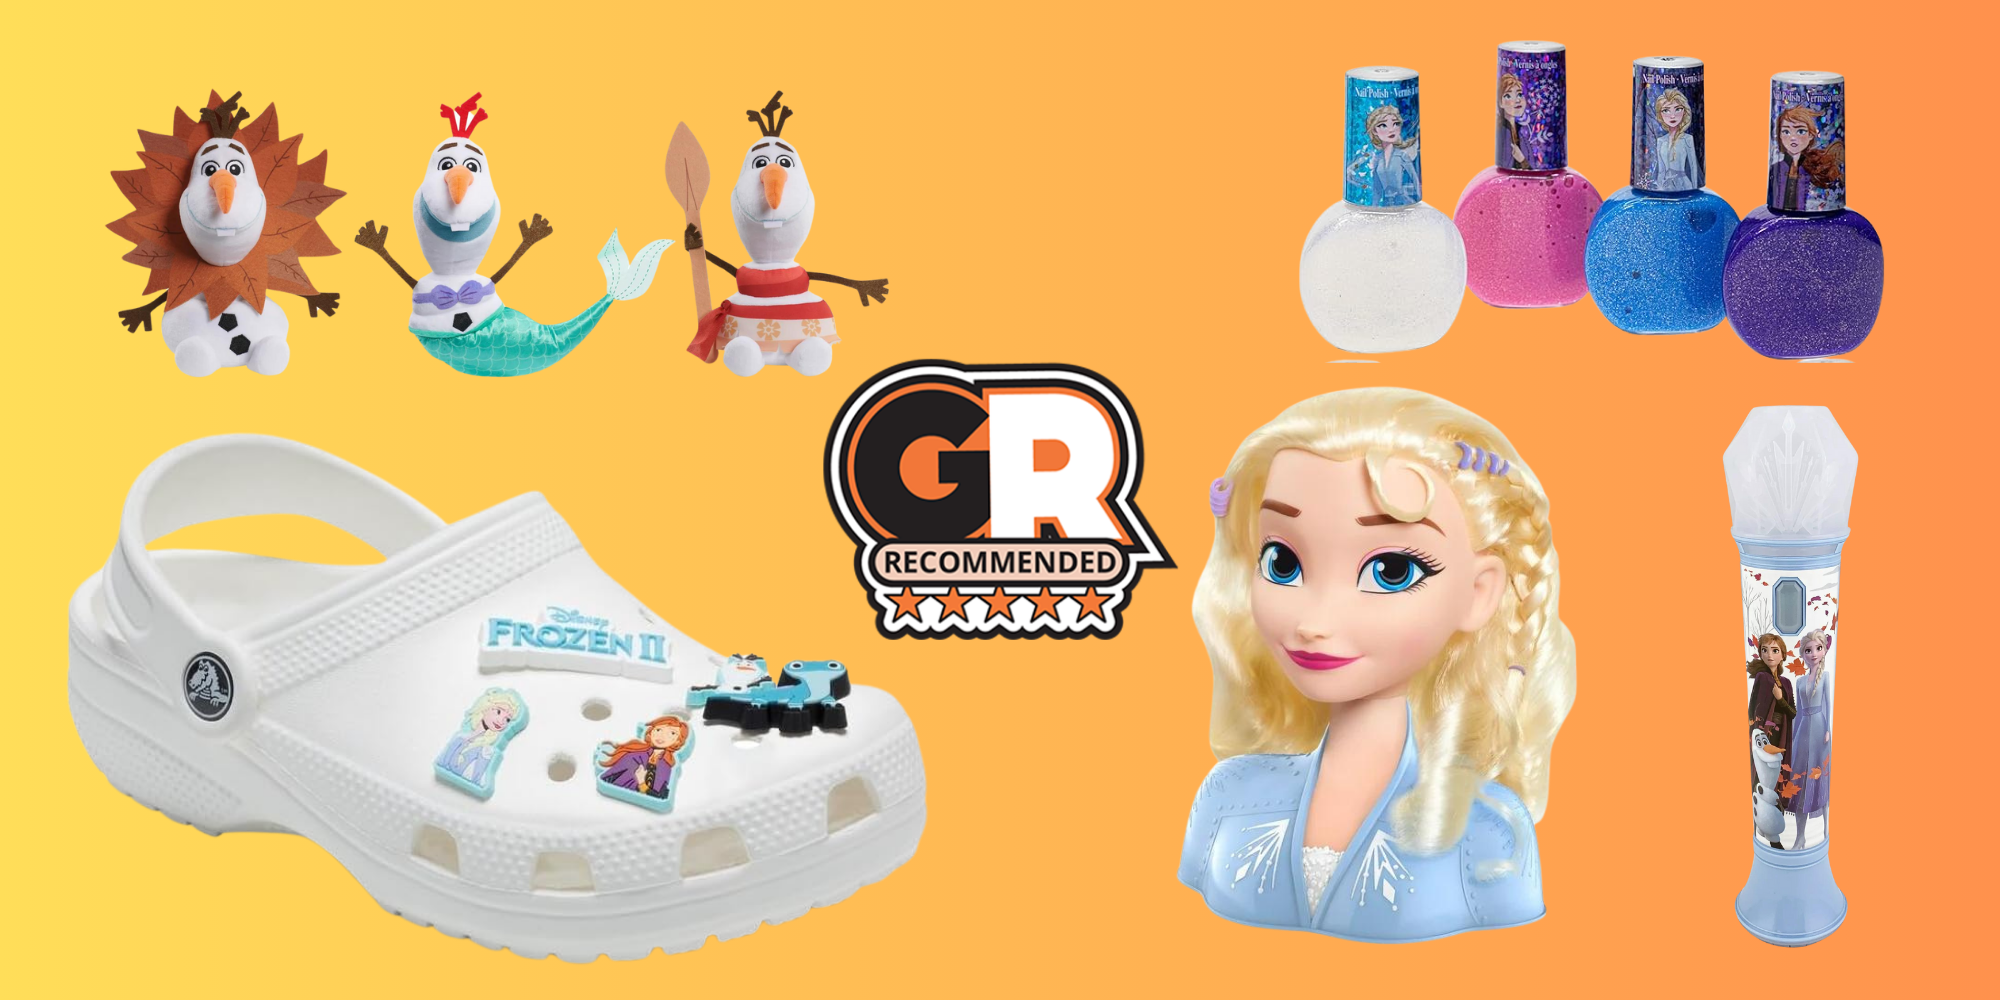 This image shows five Frozen toys and accessories 